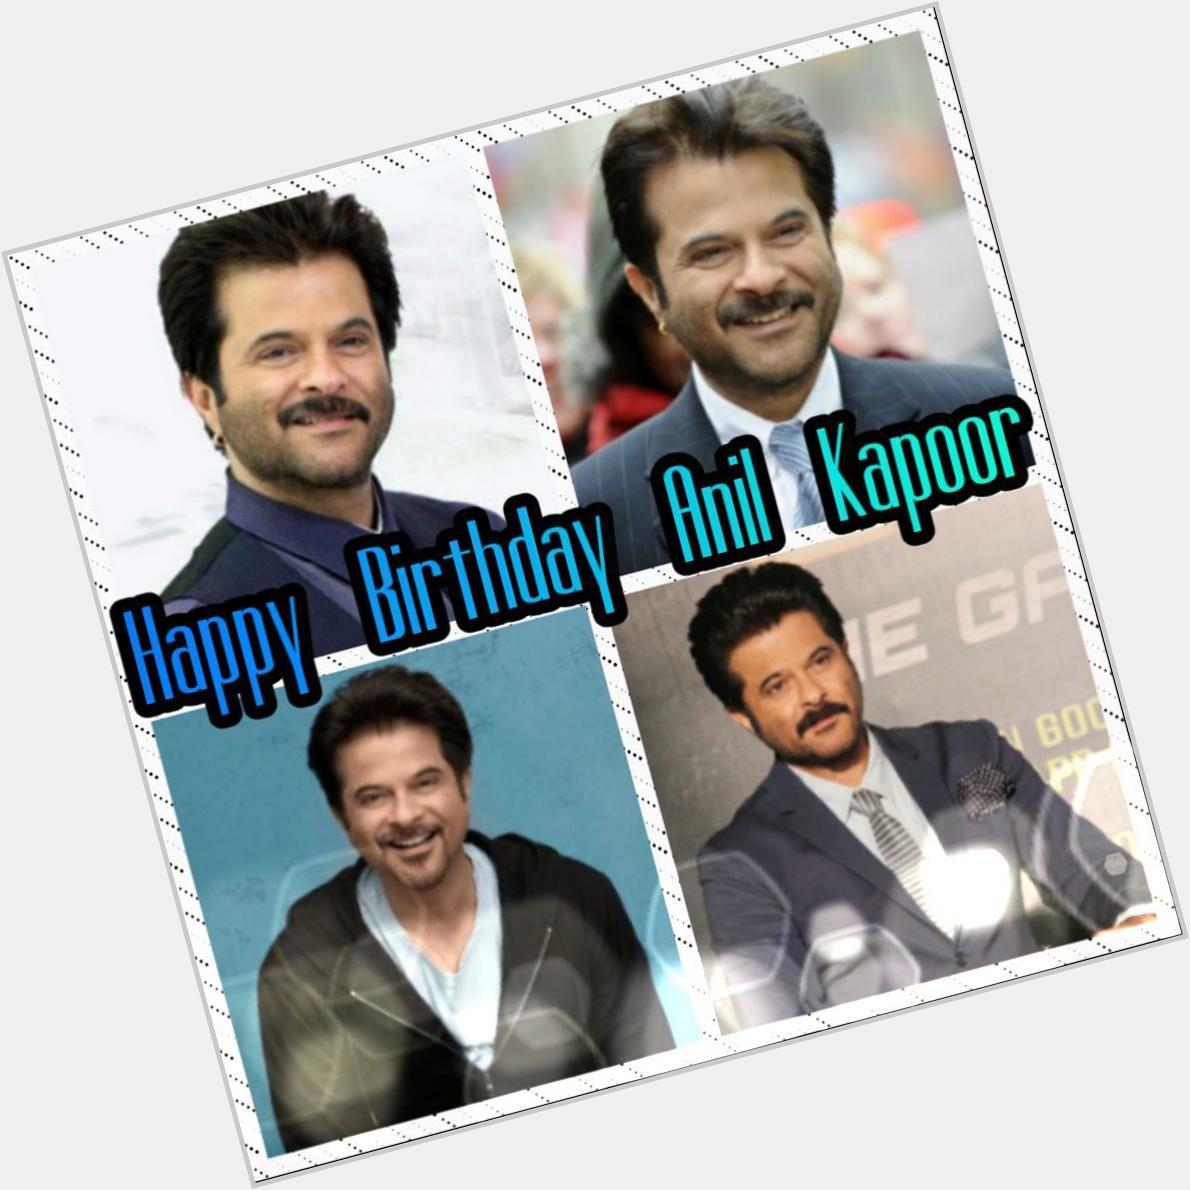 Happy Birthday Anil Kapoor sir! I wish you everything you want in the world keep smiling and acting    